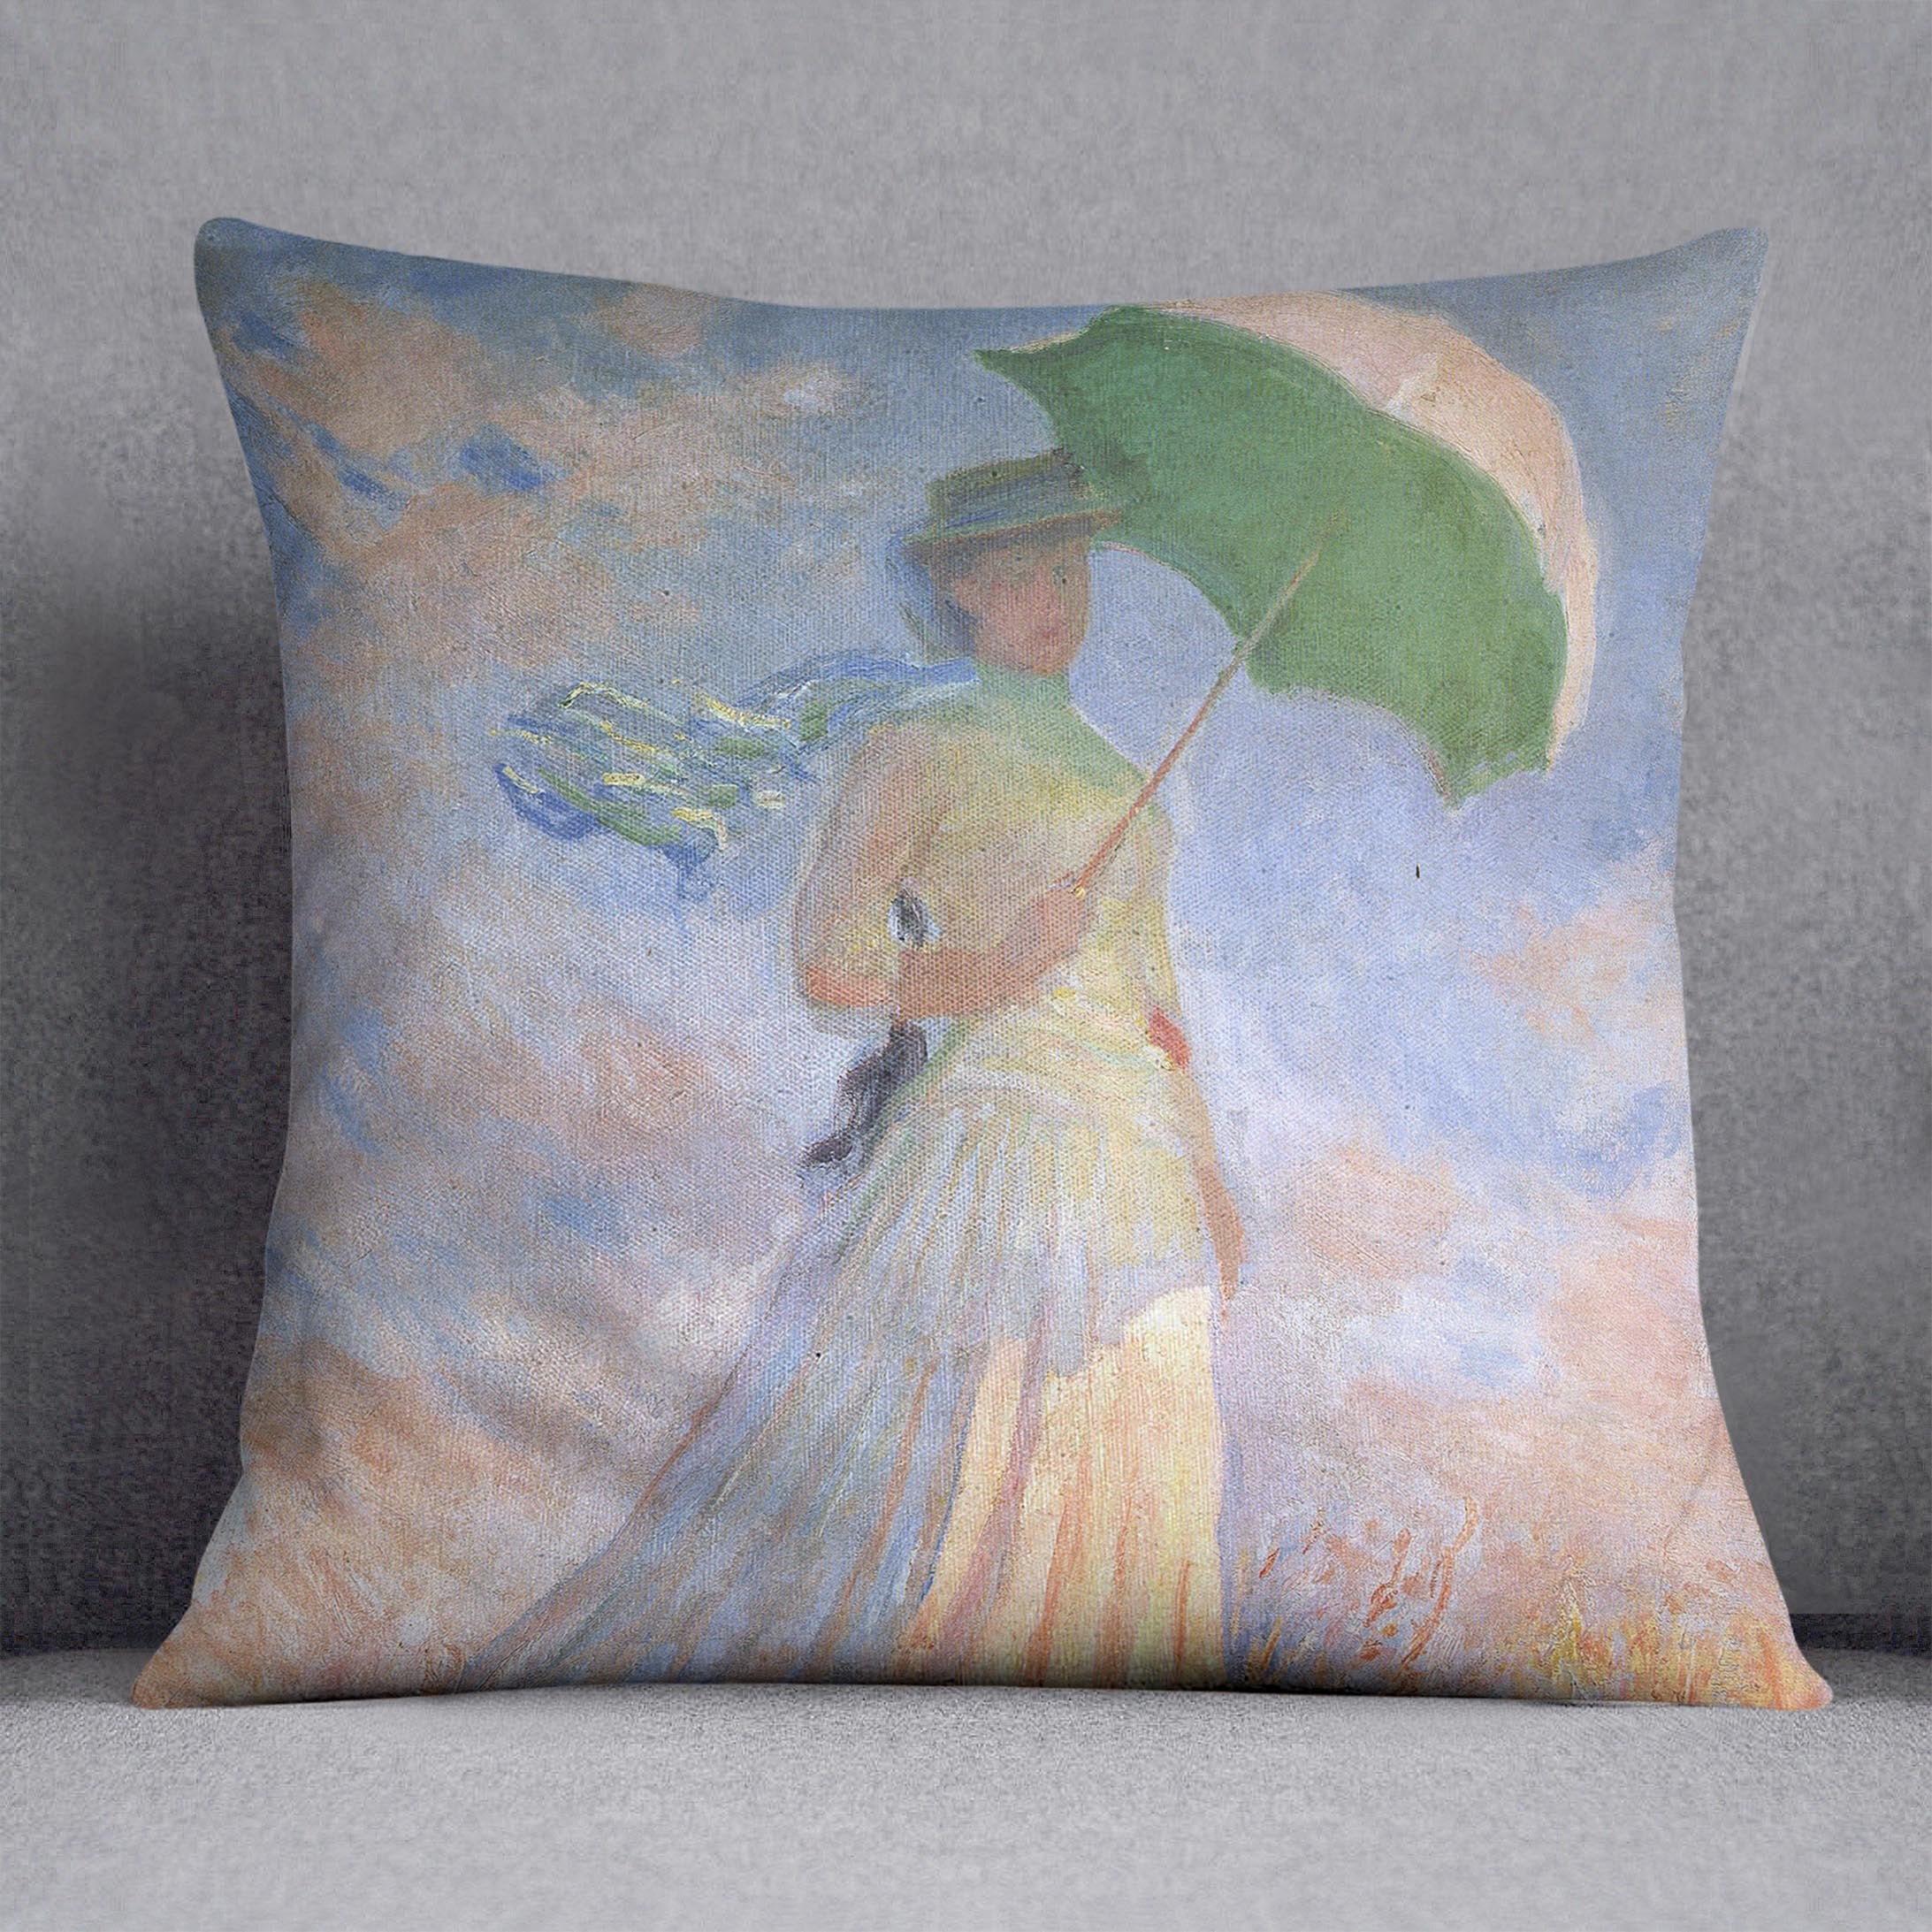 Woman with Parasol 2 by Monet Throw Pillow